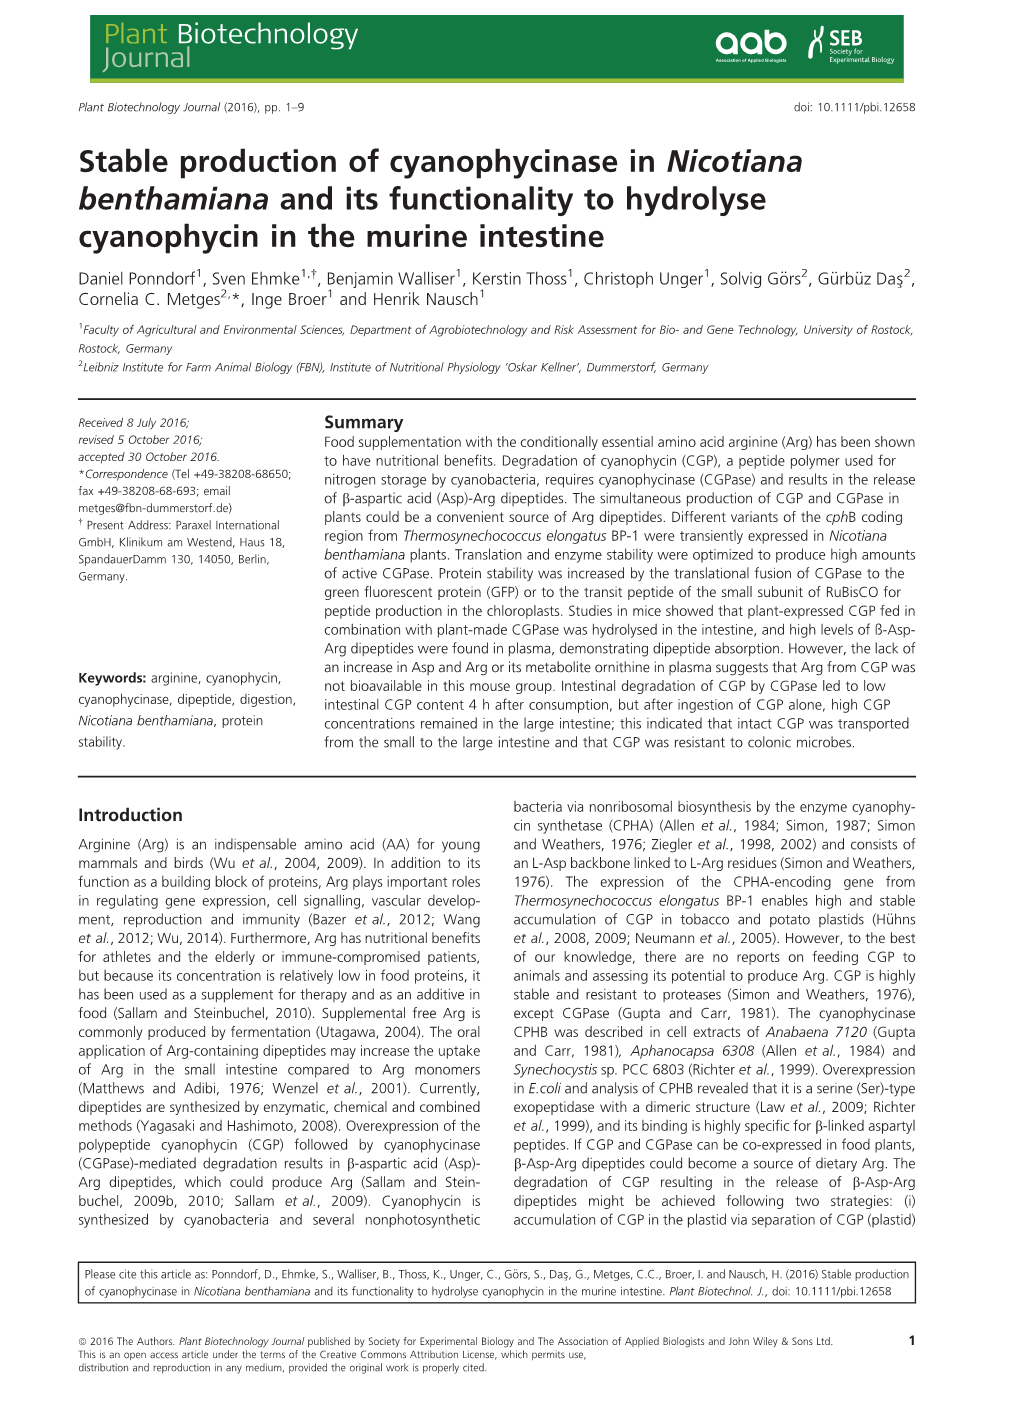 Stable Production of Cyanophycinase in Nicotiana Benthamiana and Its Functionality to Hydrolyse Cyanophycin in the Murine Intestine